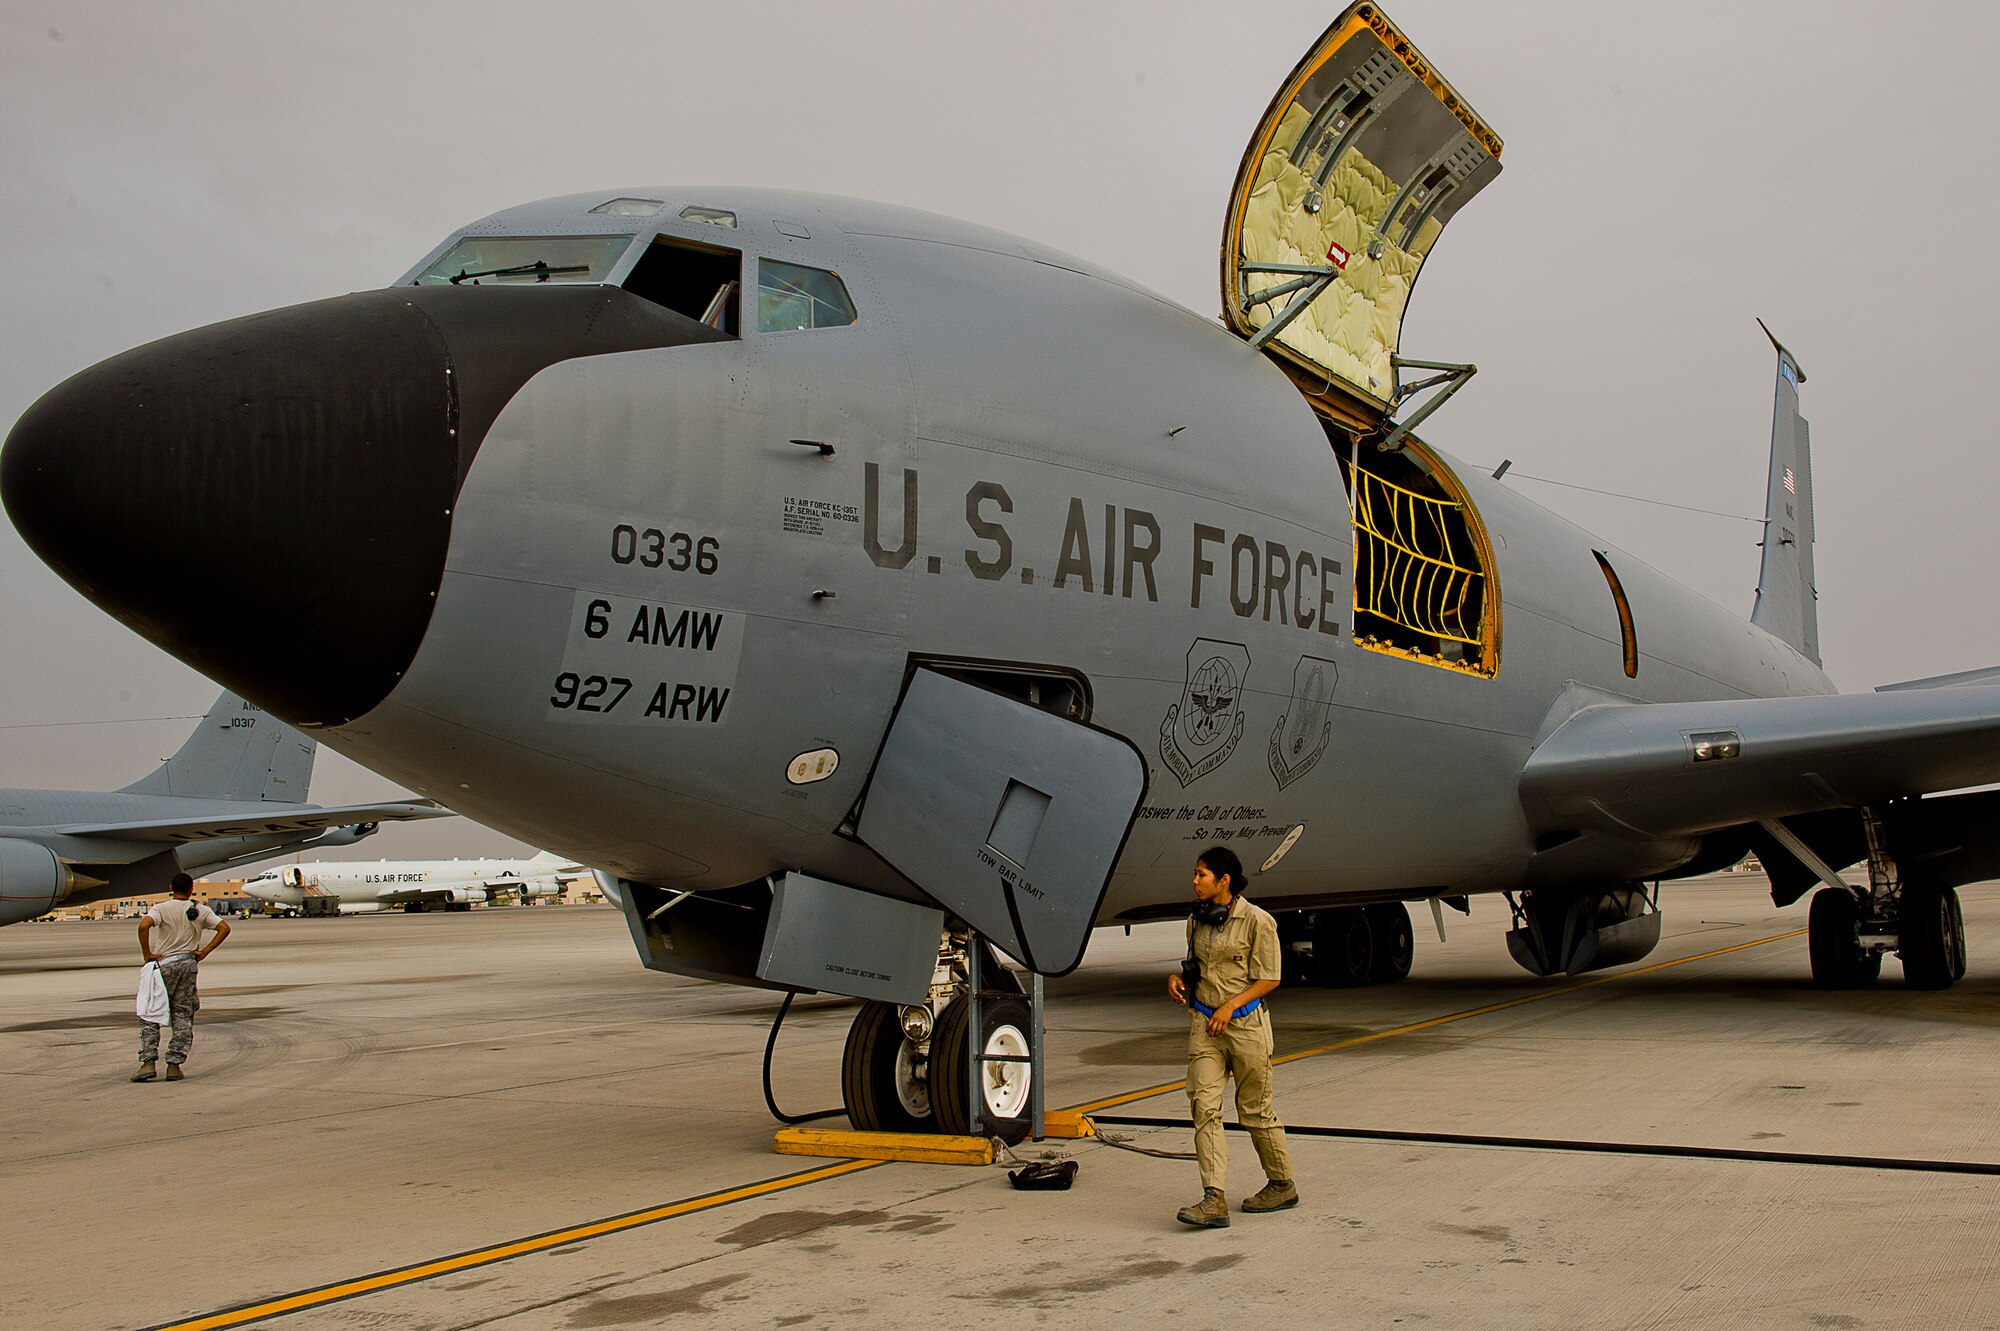 Ground maintenance crew members prepare and inspect a KC-135 Stratotanker before a refueling mission at an undisclosed air base, Southwest Asia, April 25. Refueling missions here support air operations in, and around, Afghanistan as part of Operation Enduring Freedom. (U.S. Air Force photo/Staff Sgt. Alexander Martinez)